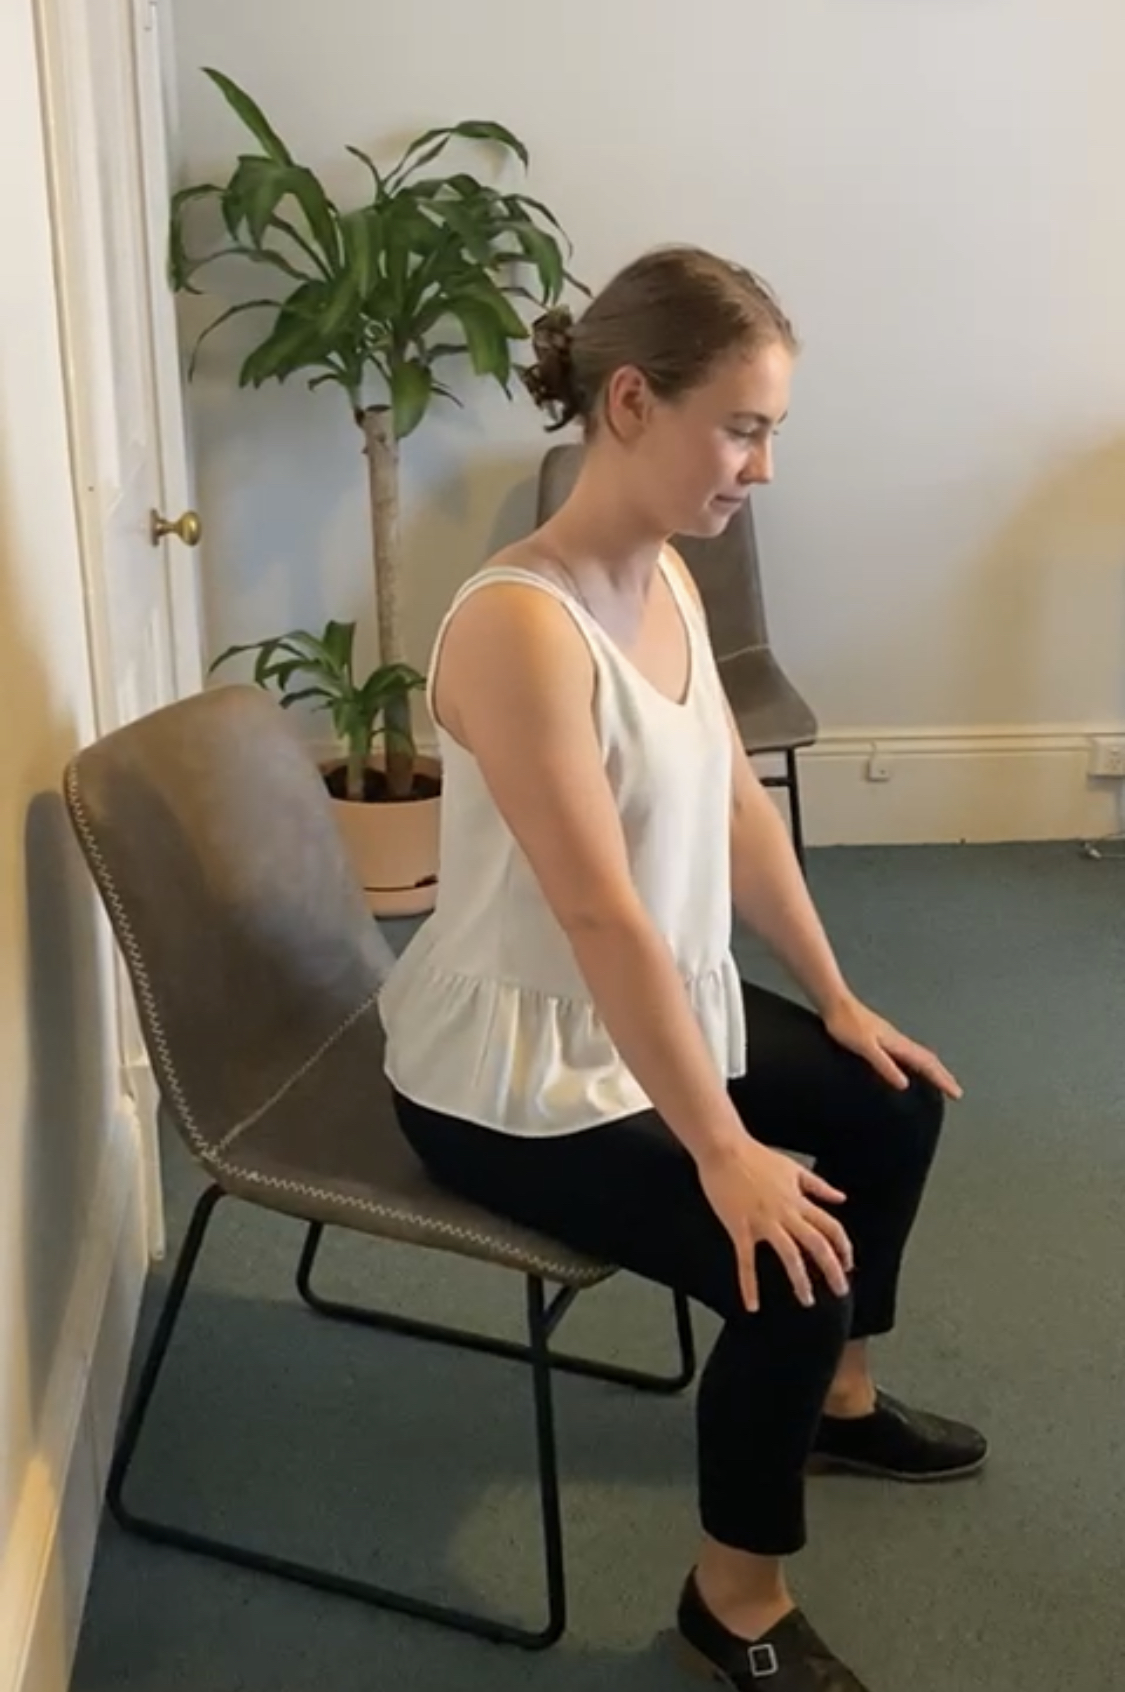 adelaide osteopath resilient health chiropractor massage osteopathy cat camelchair5